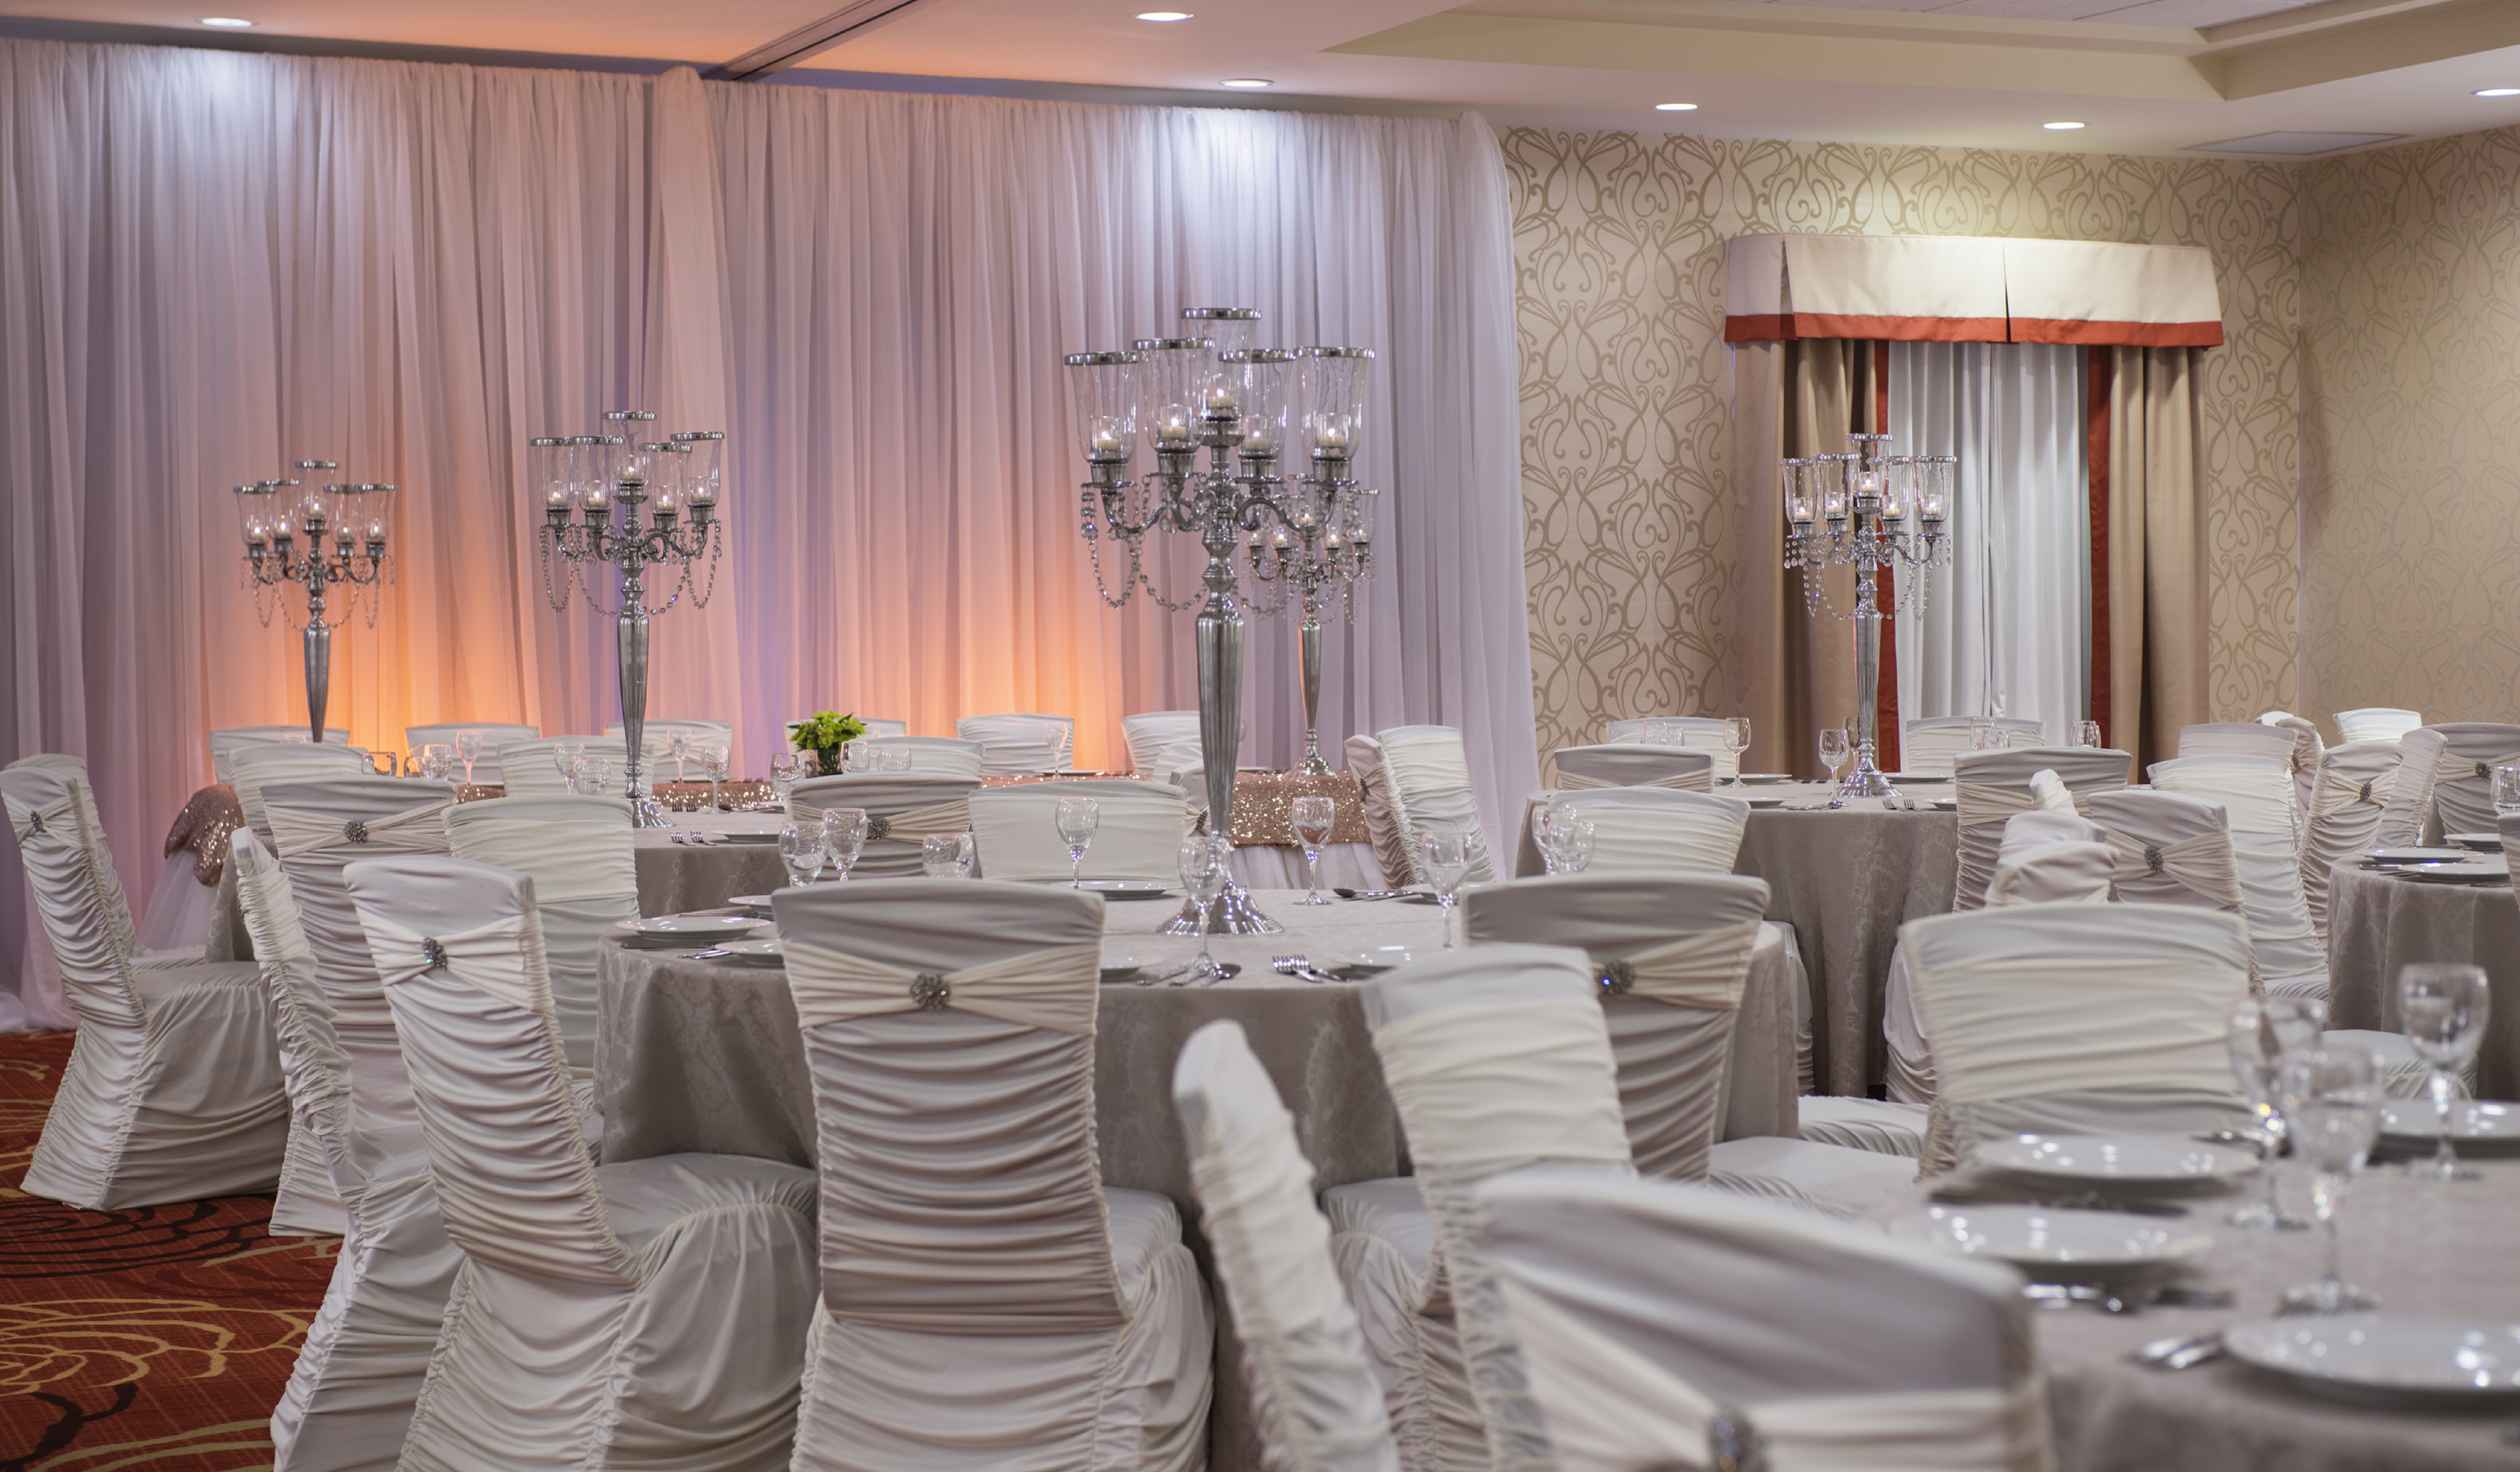 Ballroom With White Tablecloths on Round Tables Set Up for Wedding Reception 